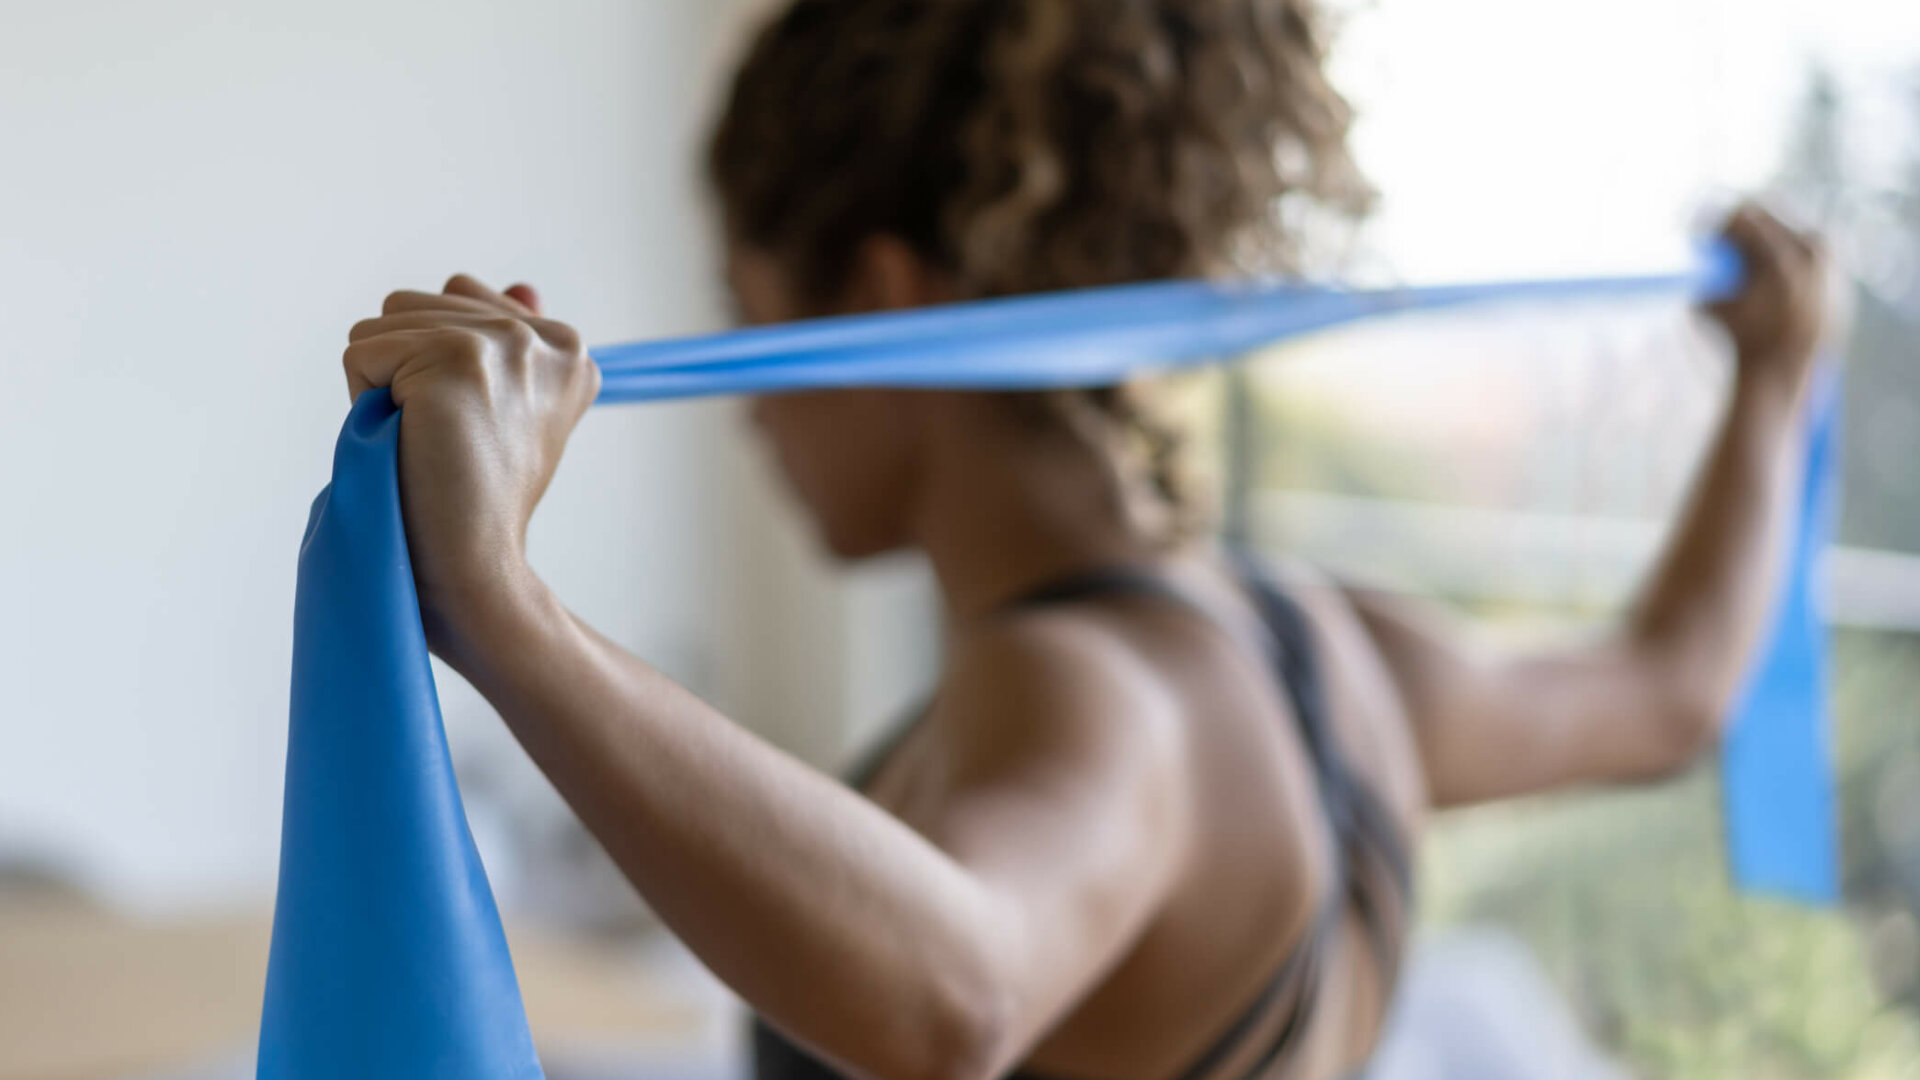 Resistance Bands for Physique Athletes